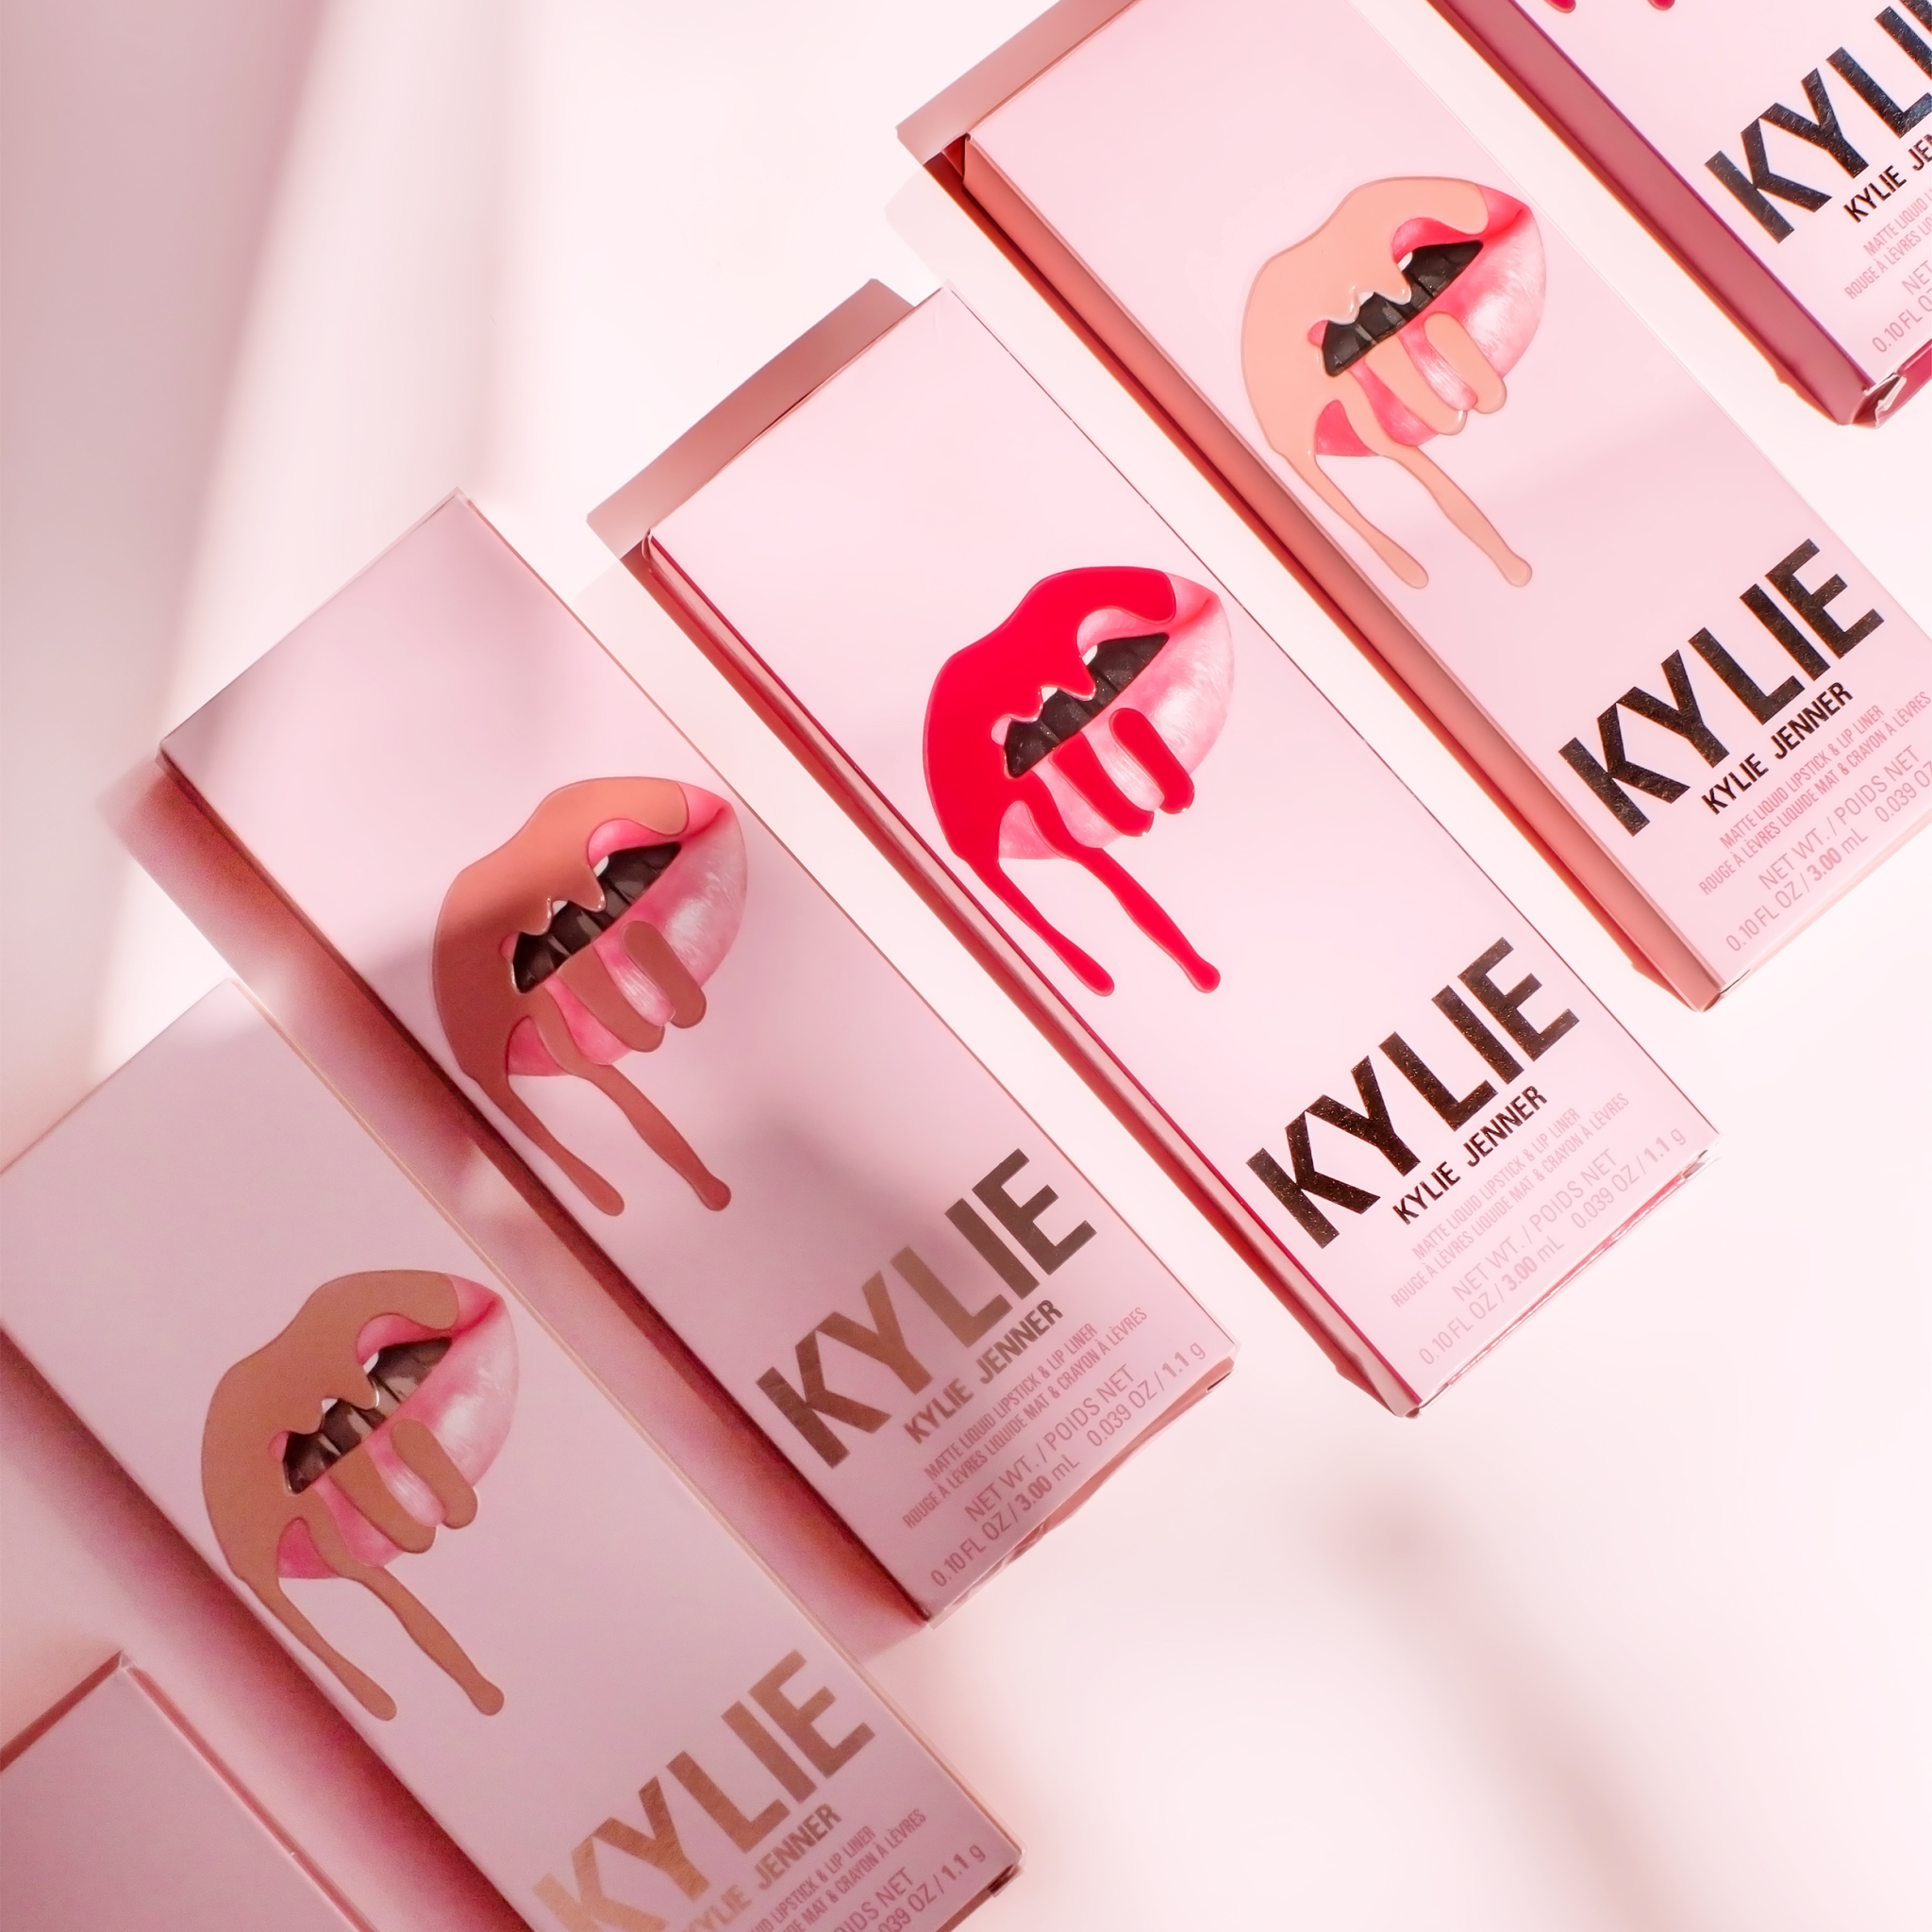 Kylie Cosmetics Launches Here In Dubai